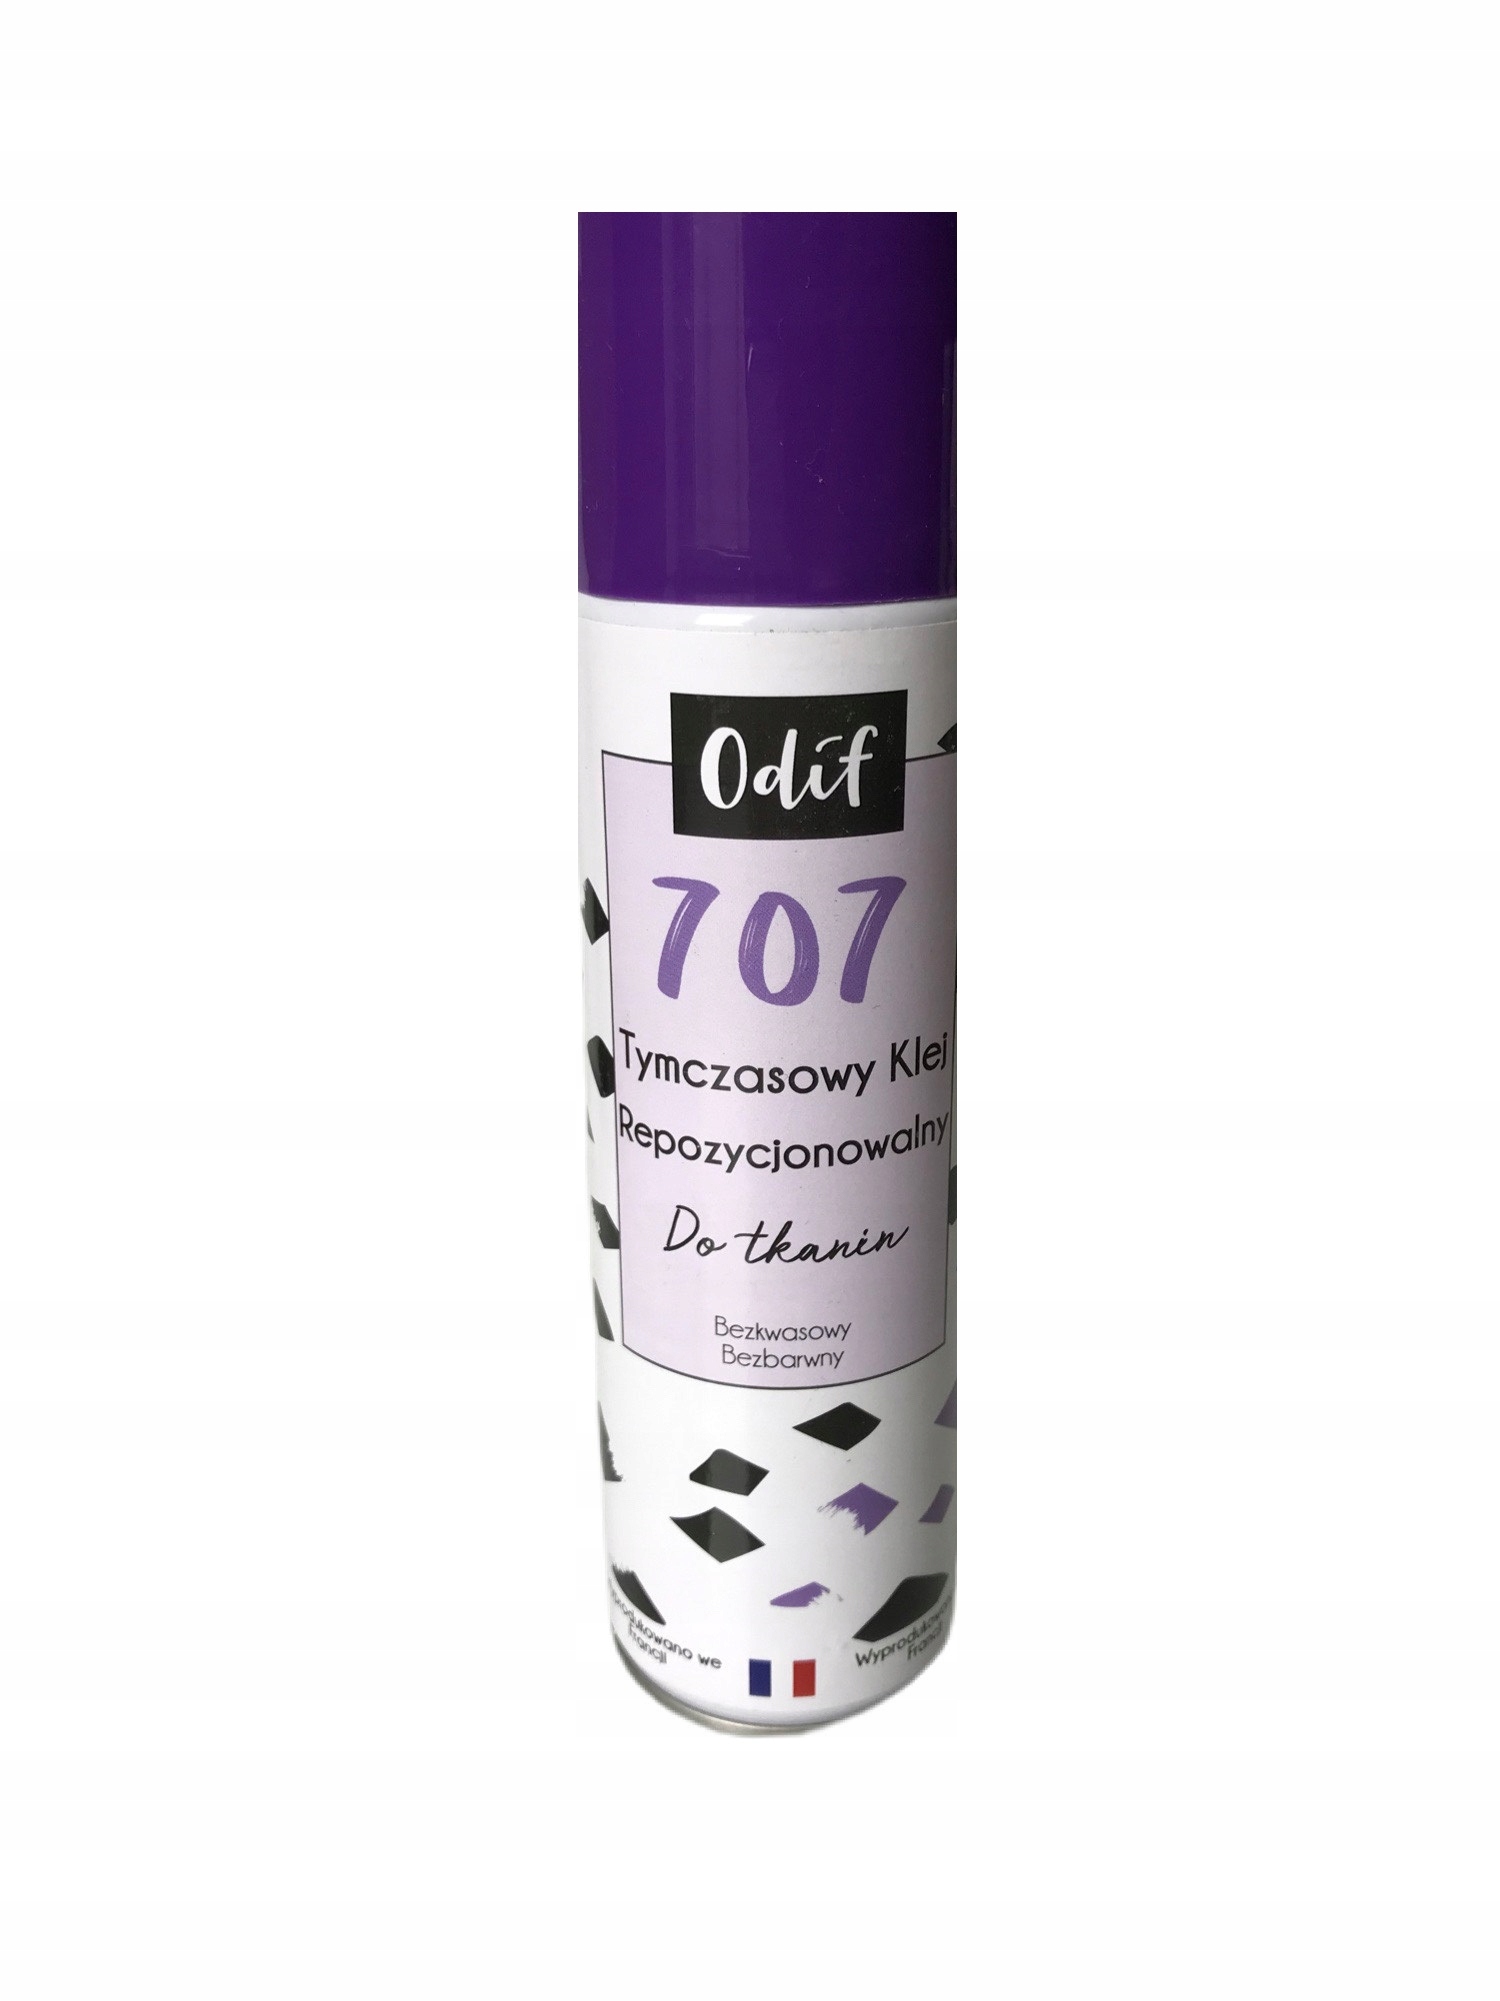 Colle repositionnable spray Odif 707